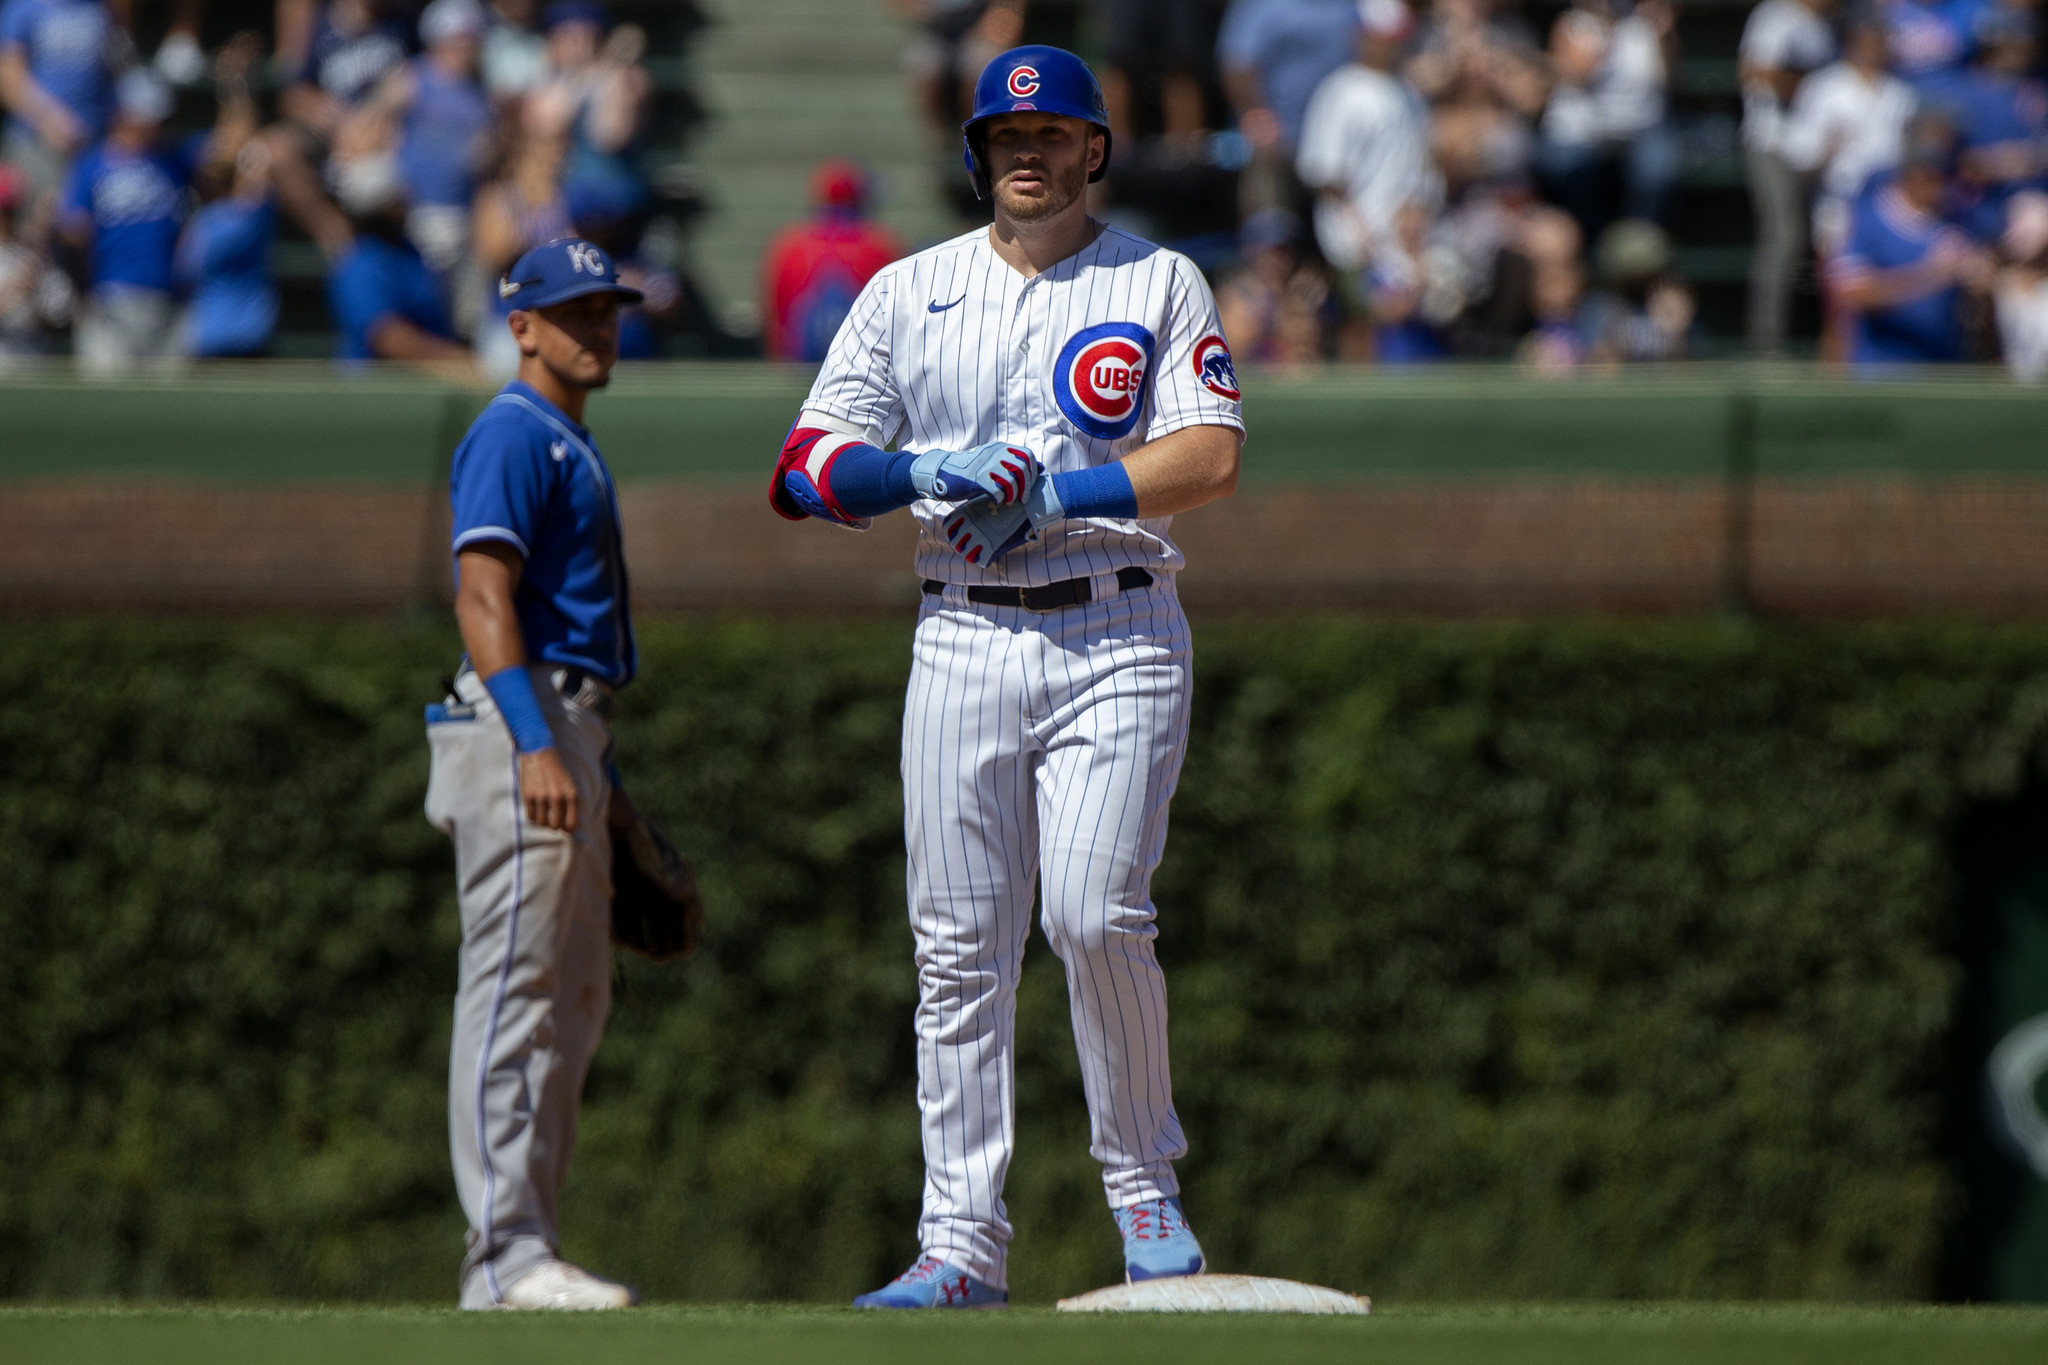 Chicago Cubs get outhit 14-3 as their win streak ends at 5